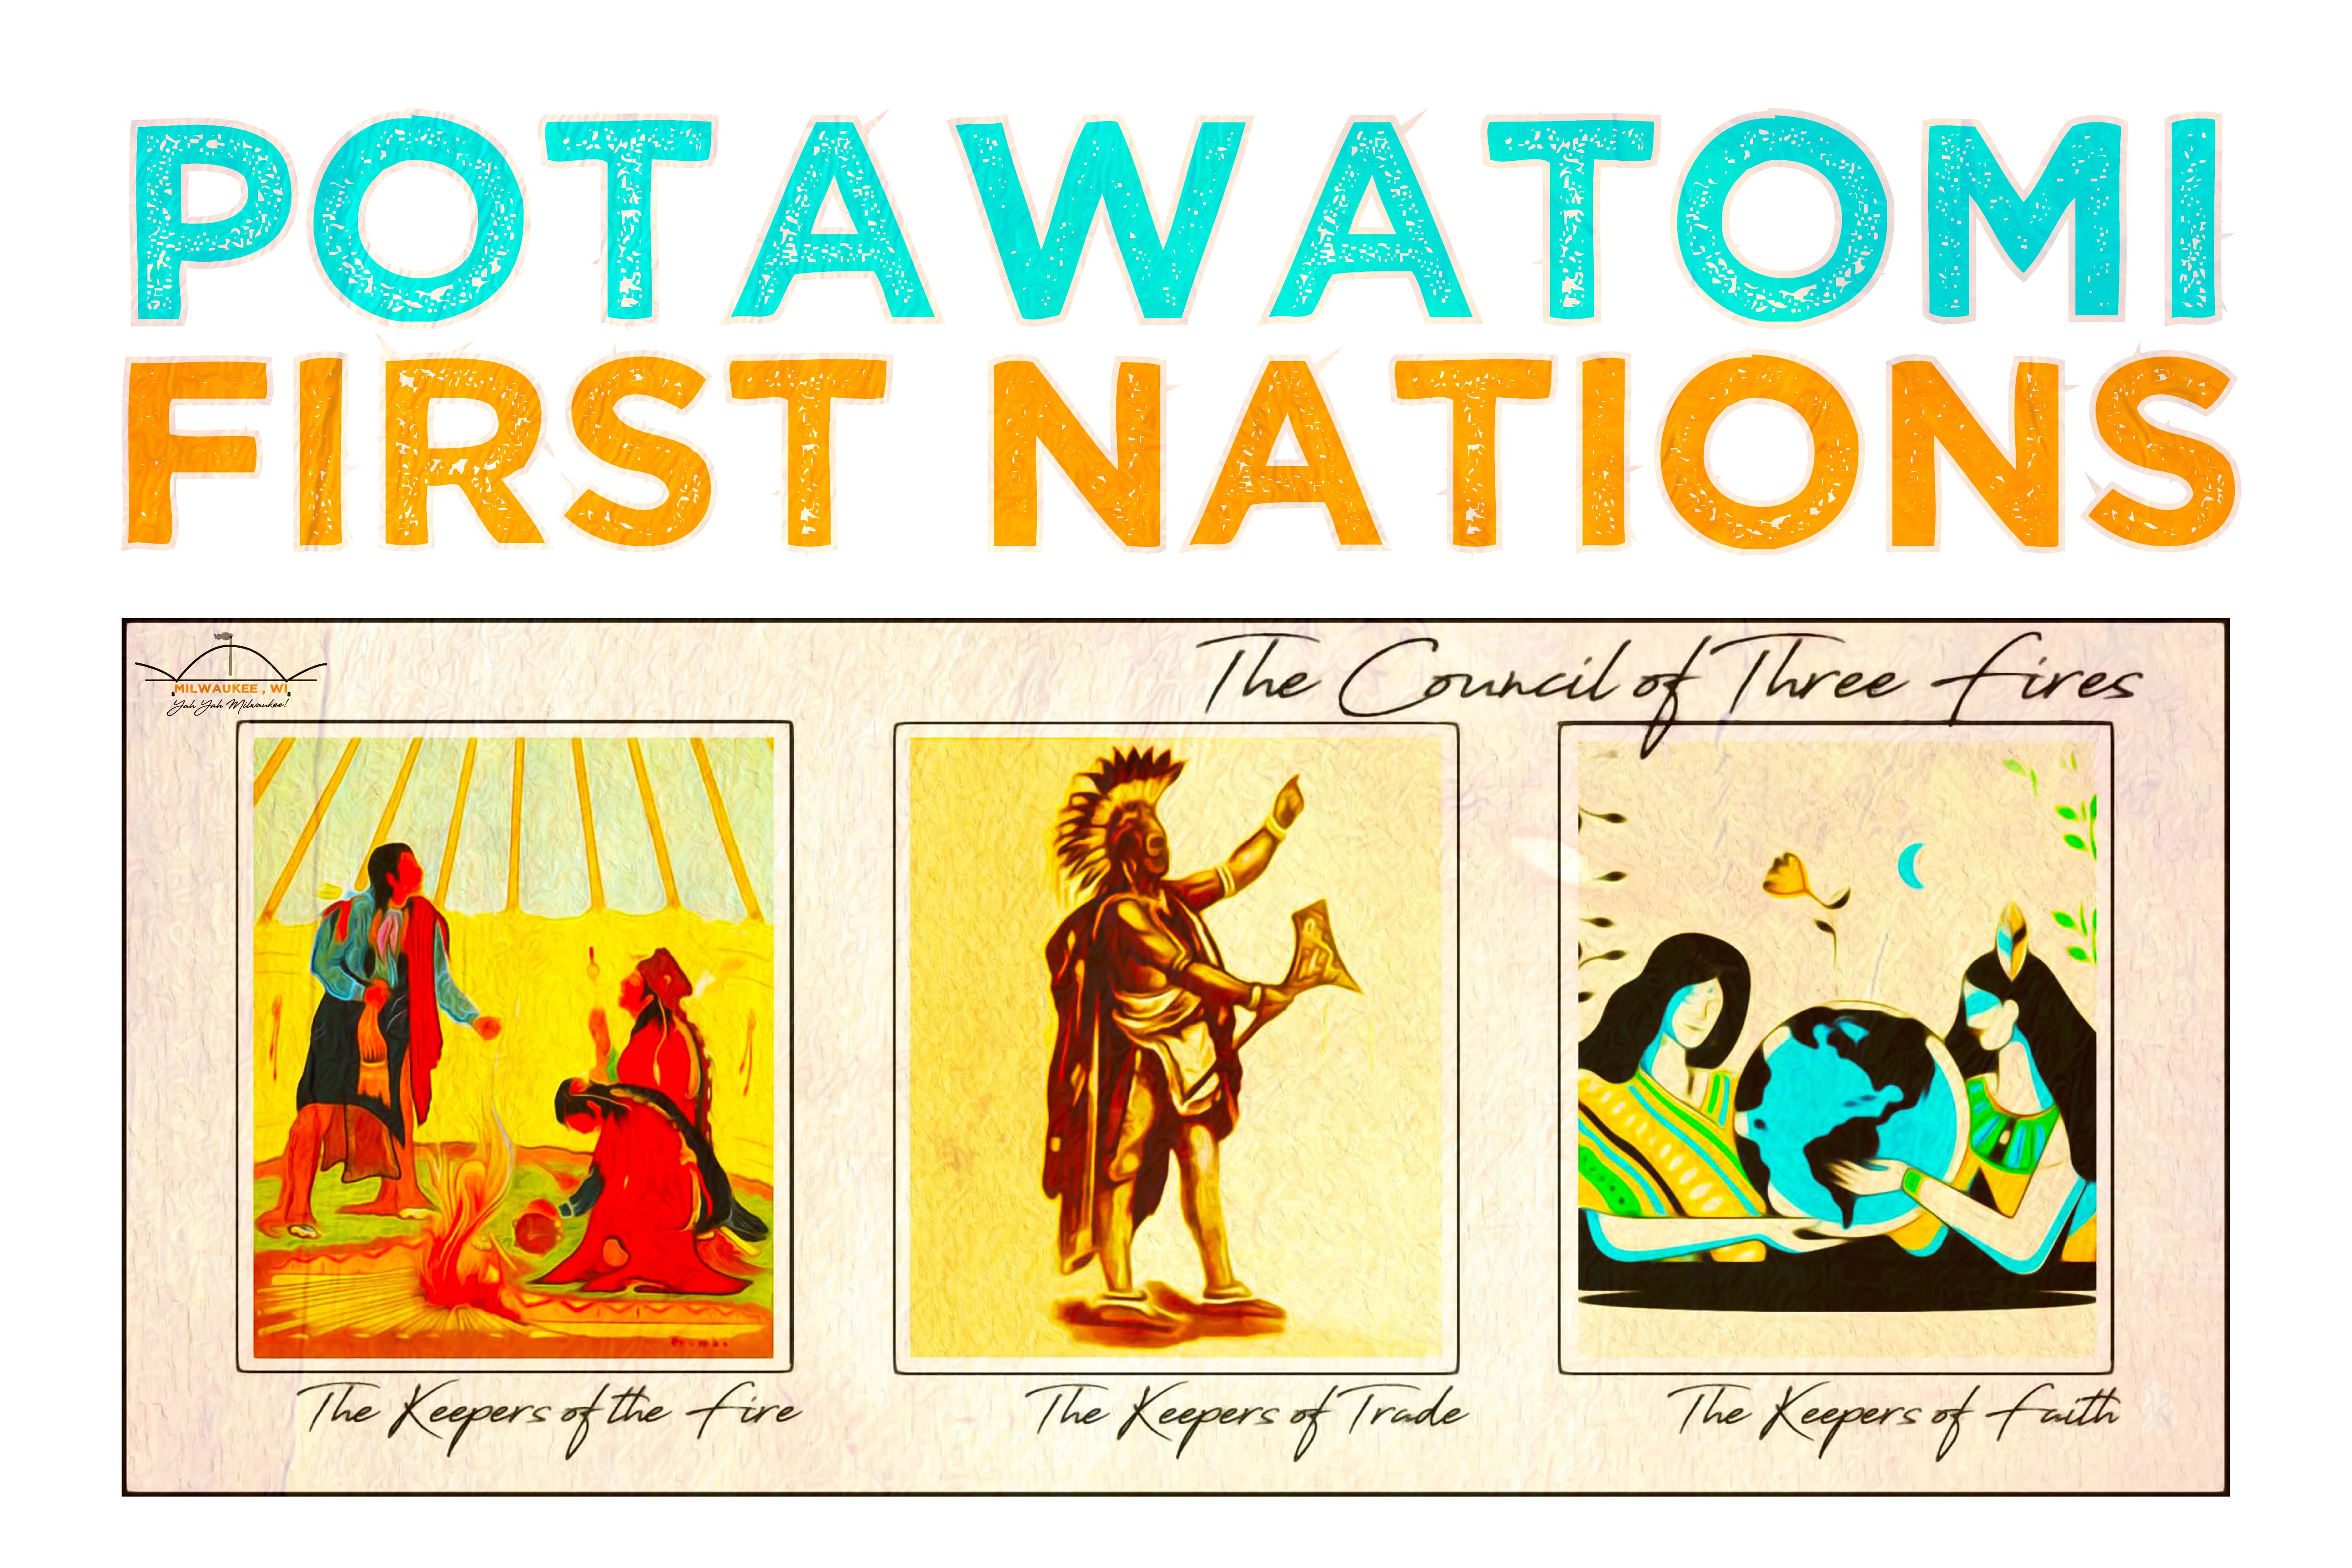 Potawatomi, Ojibwe, and Ottawa coexisted like family over generations. From there, the three tribes split off into three distinct groups. “The Council of Three Fires” is an alliance of the three nations.